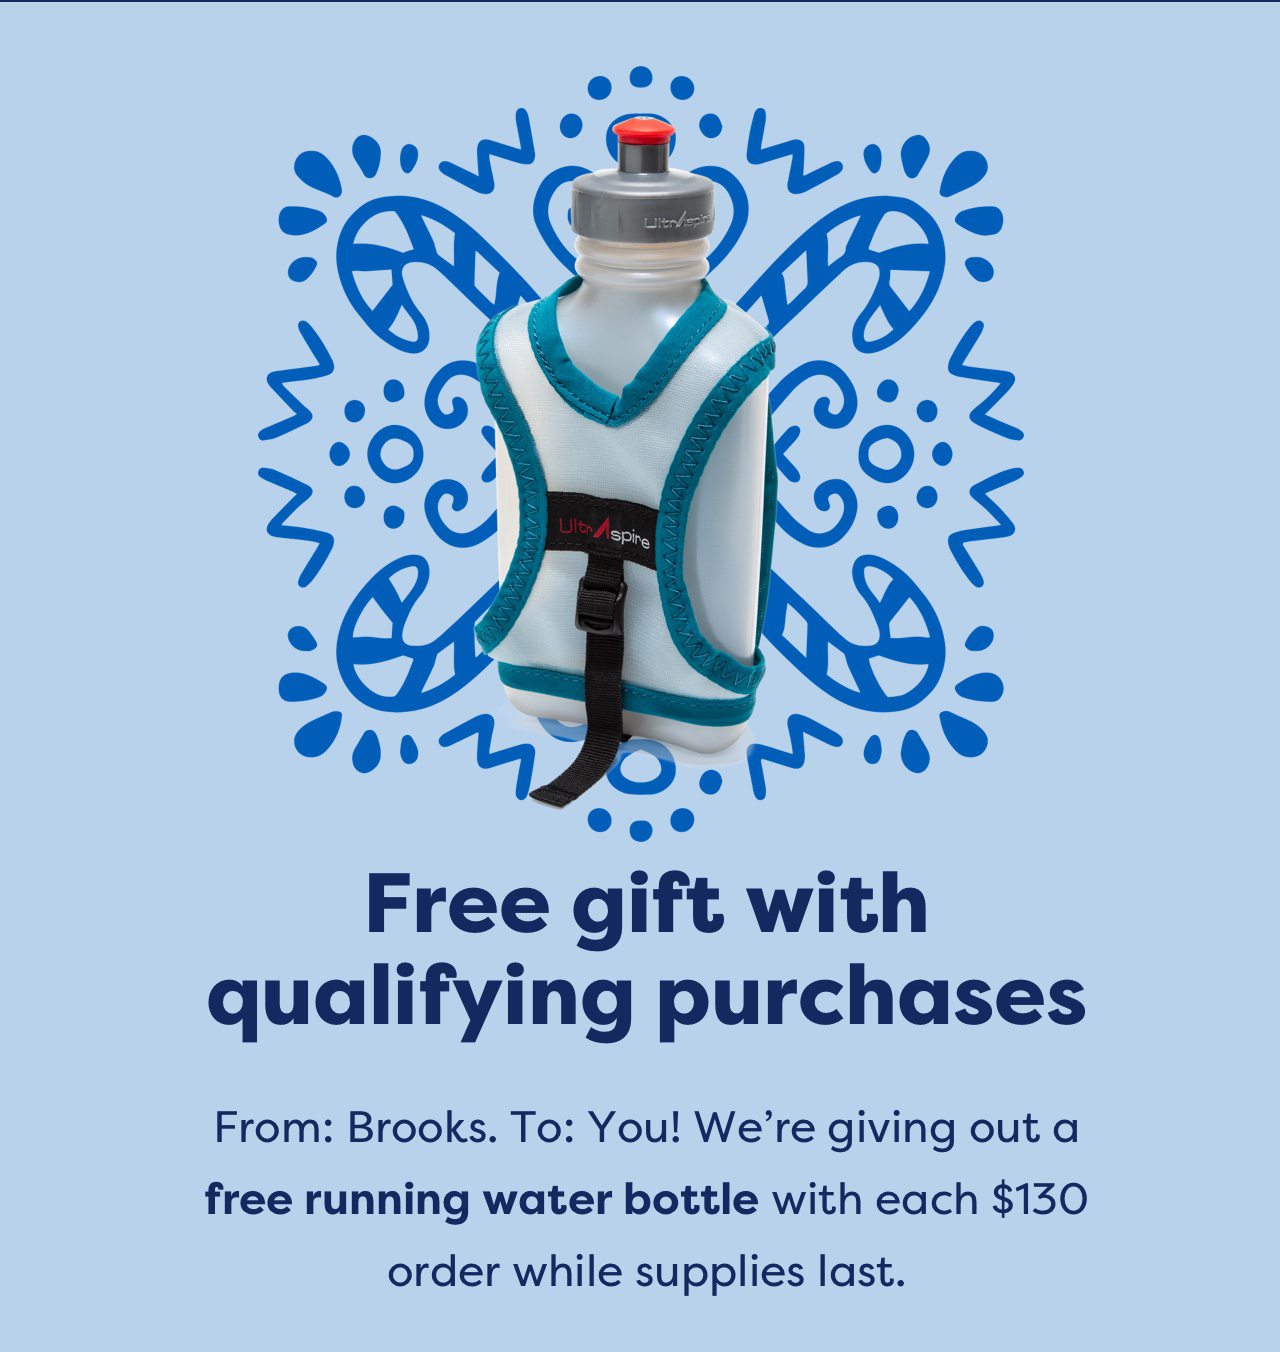 Free gift with qualifying purchases | From: Brooks. To: You! We're giving out a free running water bottle with each $130 order while supplies last.